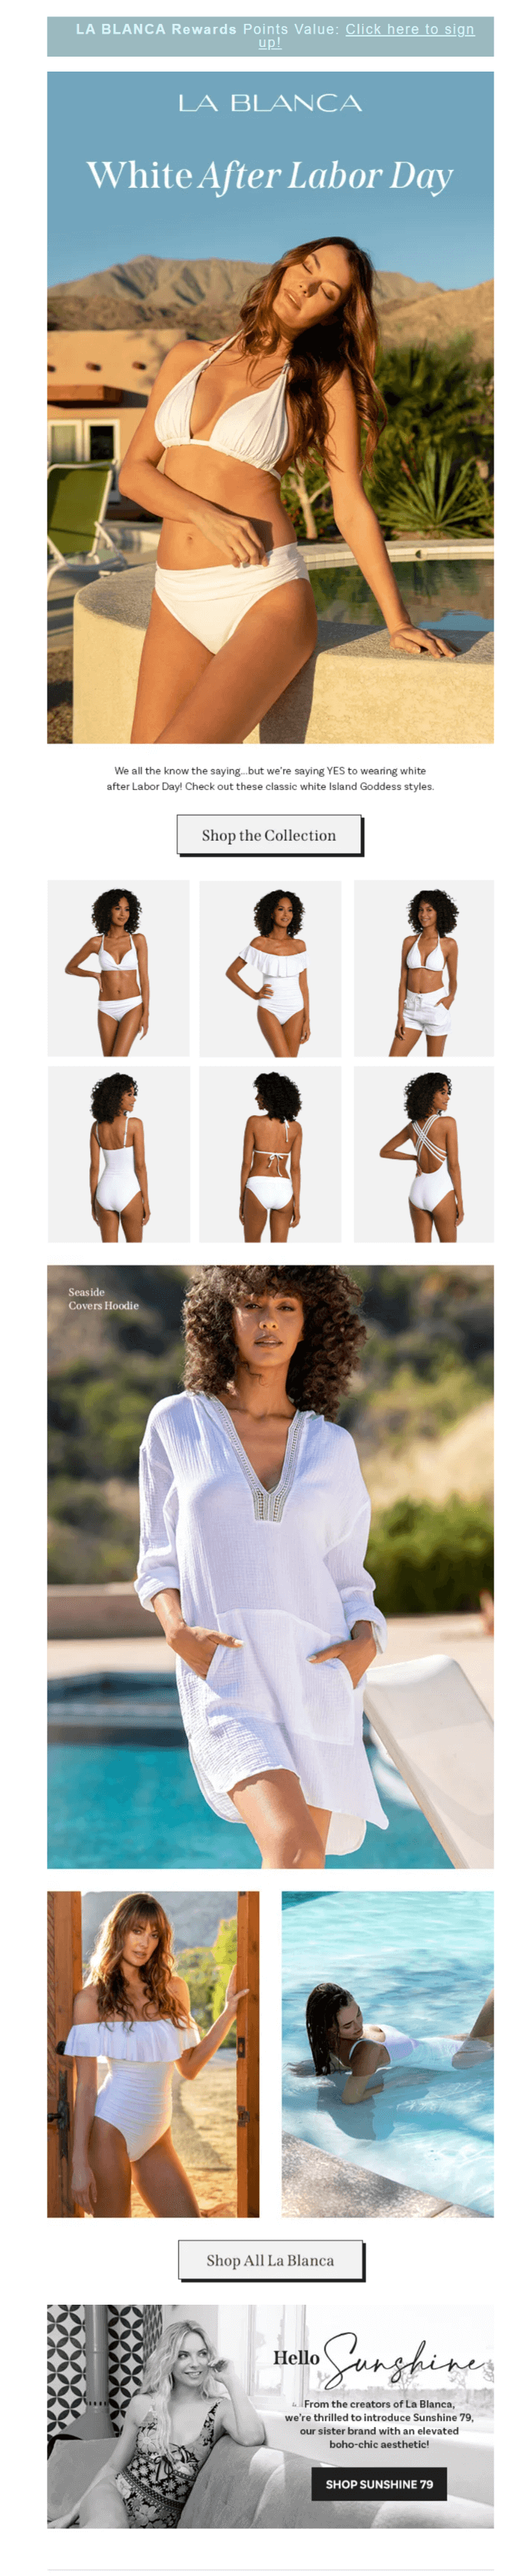 A Labor Day email from La Blanca that promotes white swimsuits and beach apparel with a tagline “White after Labor Day”